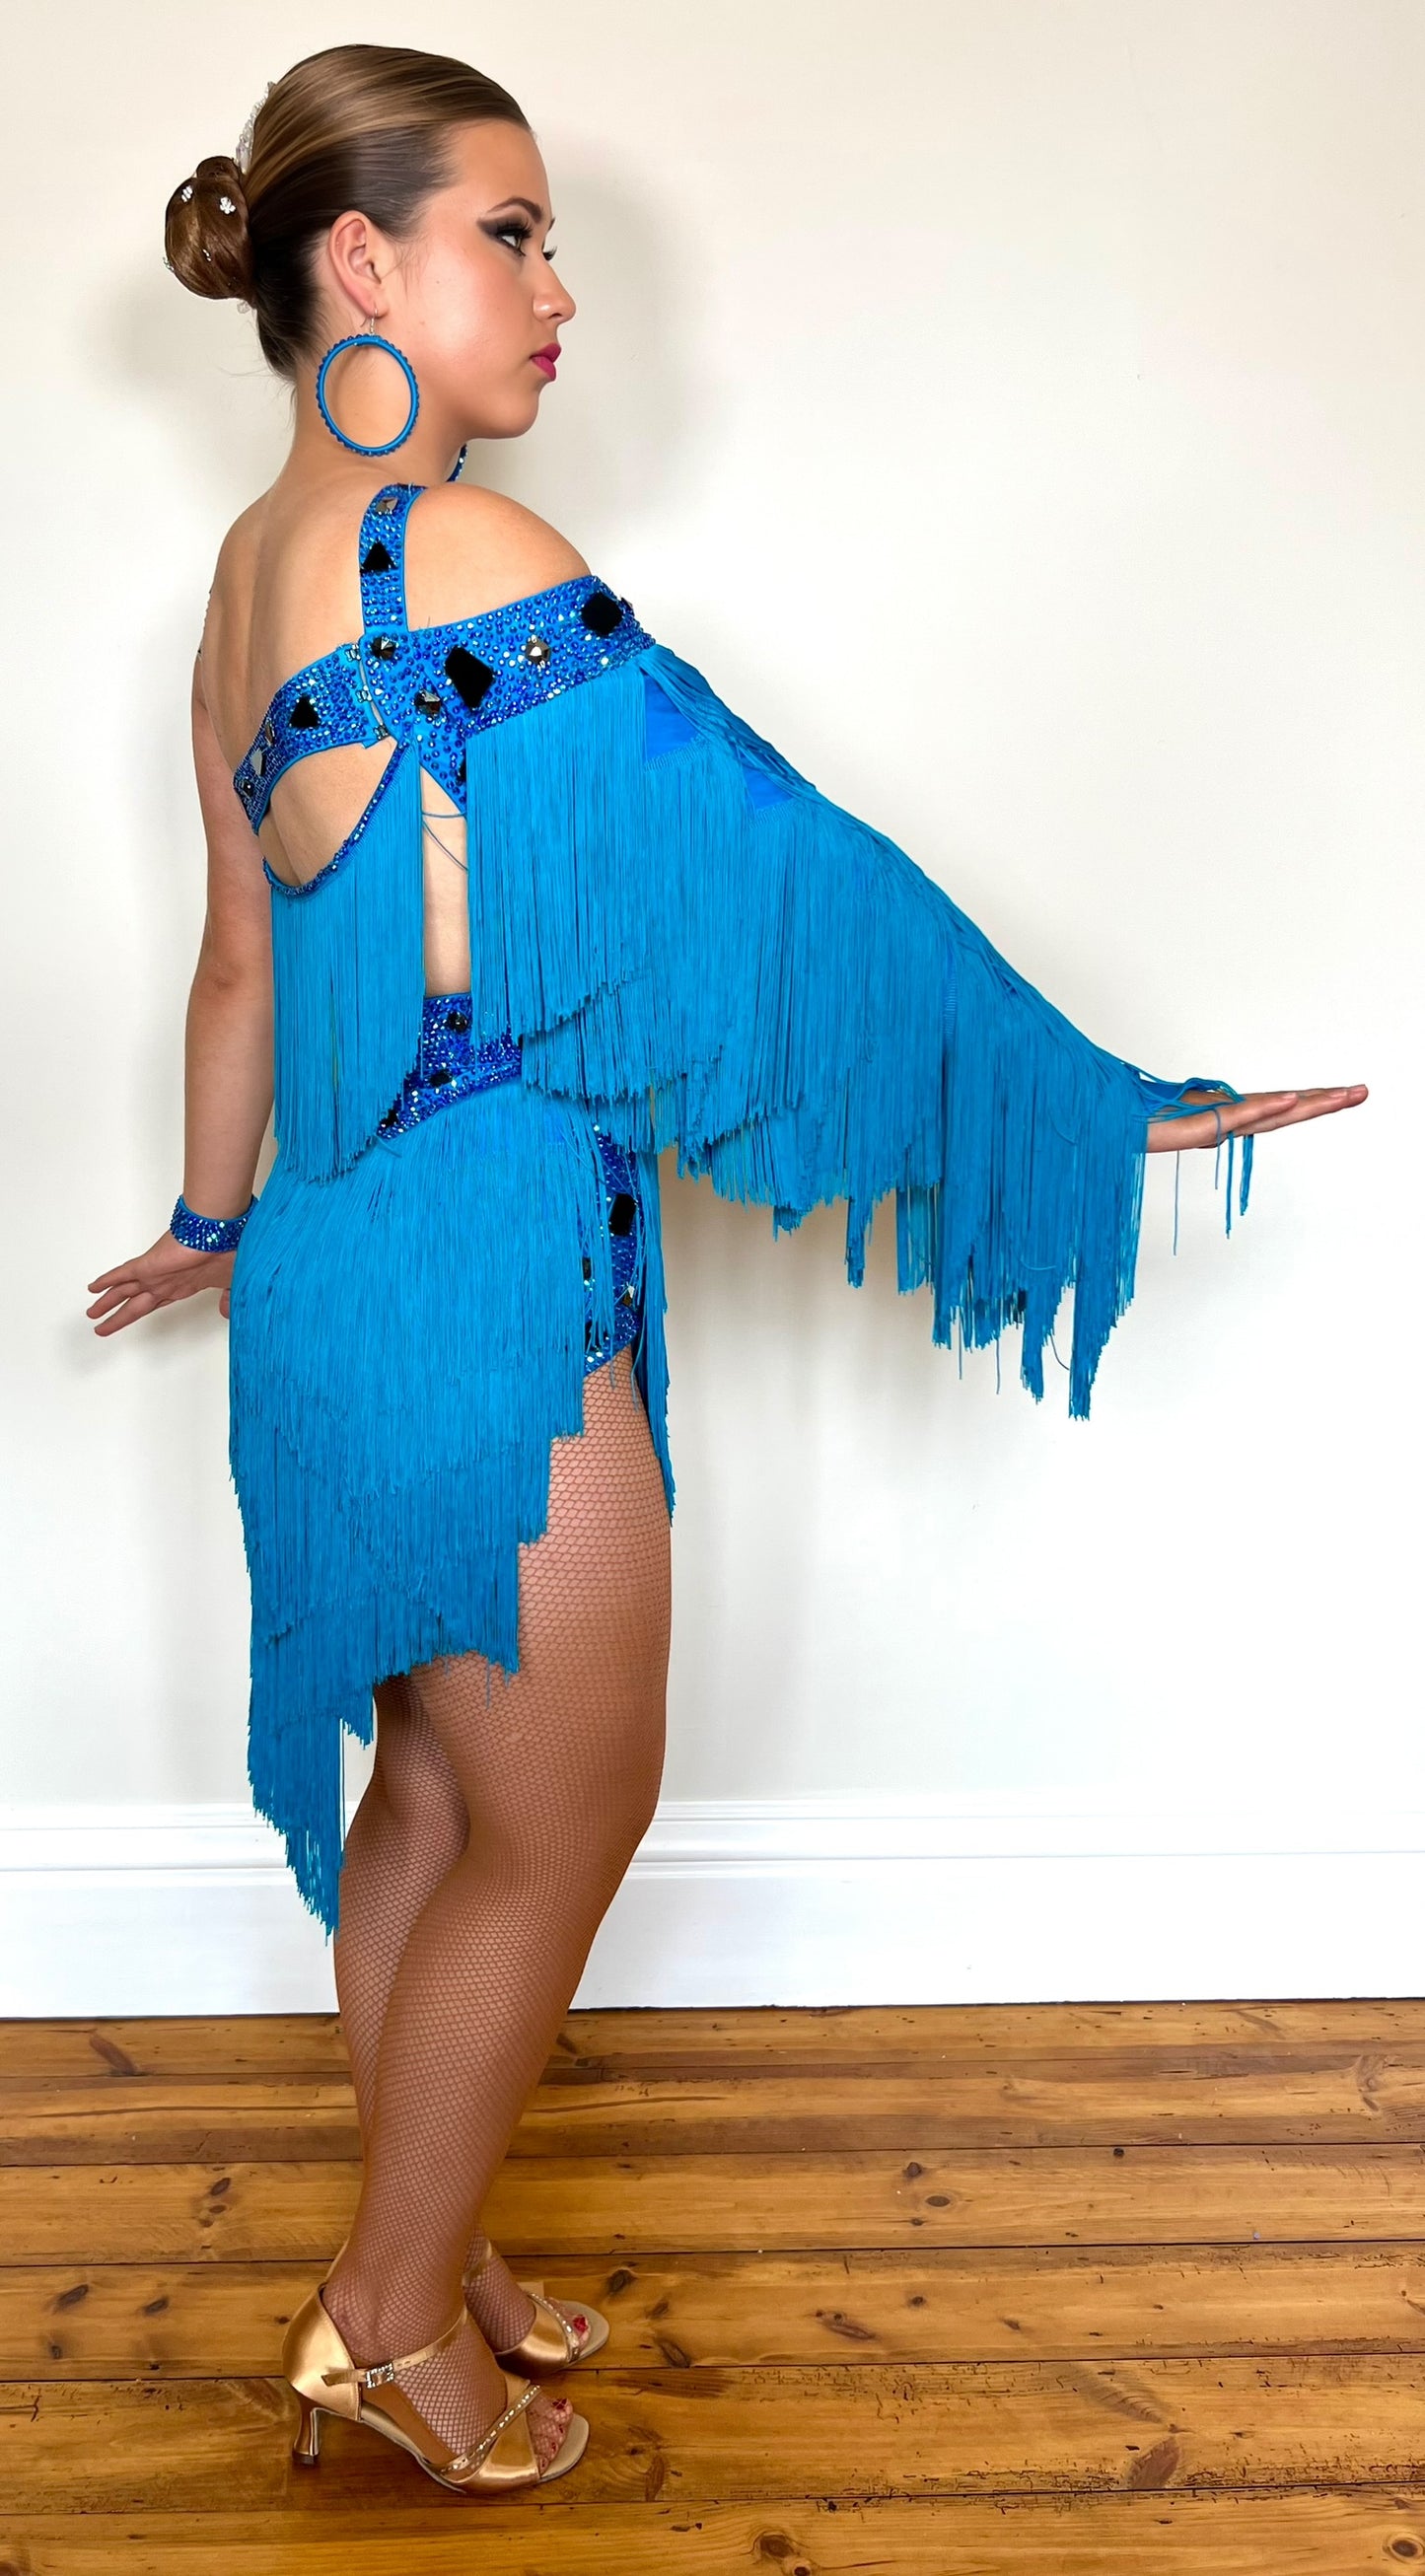 310 Statement Turquoise Latin Dress. Fringed one arm dress with strapping details decorated with Turquoise stones.